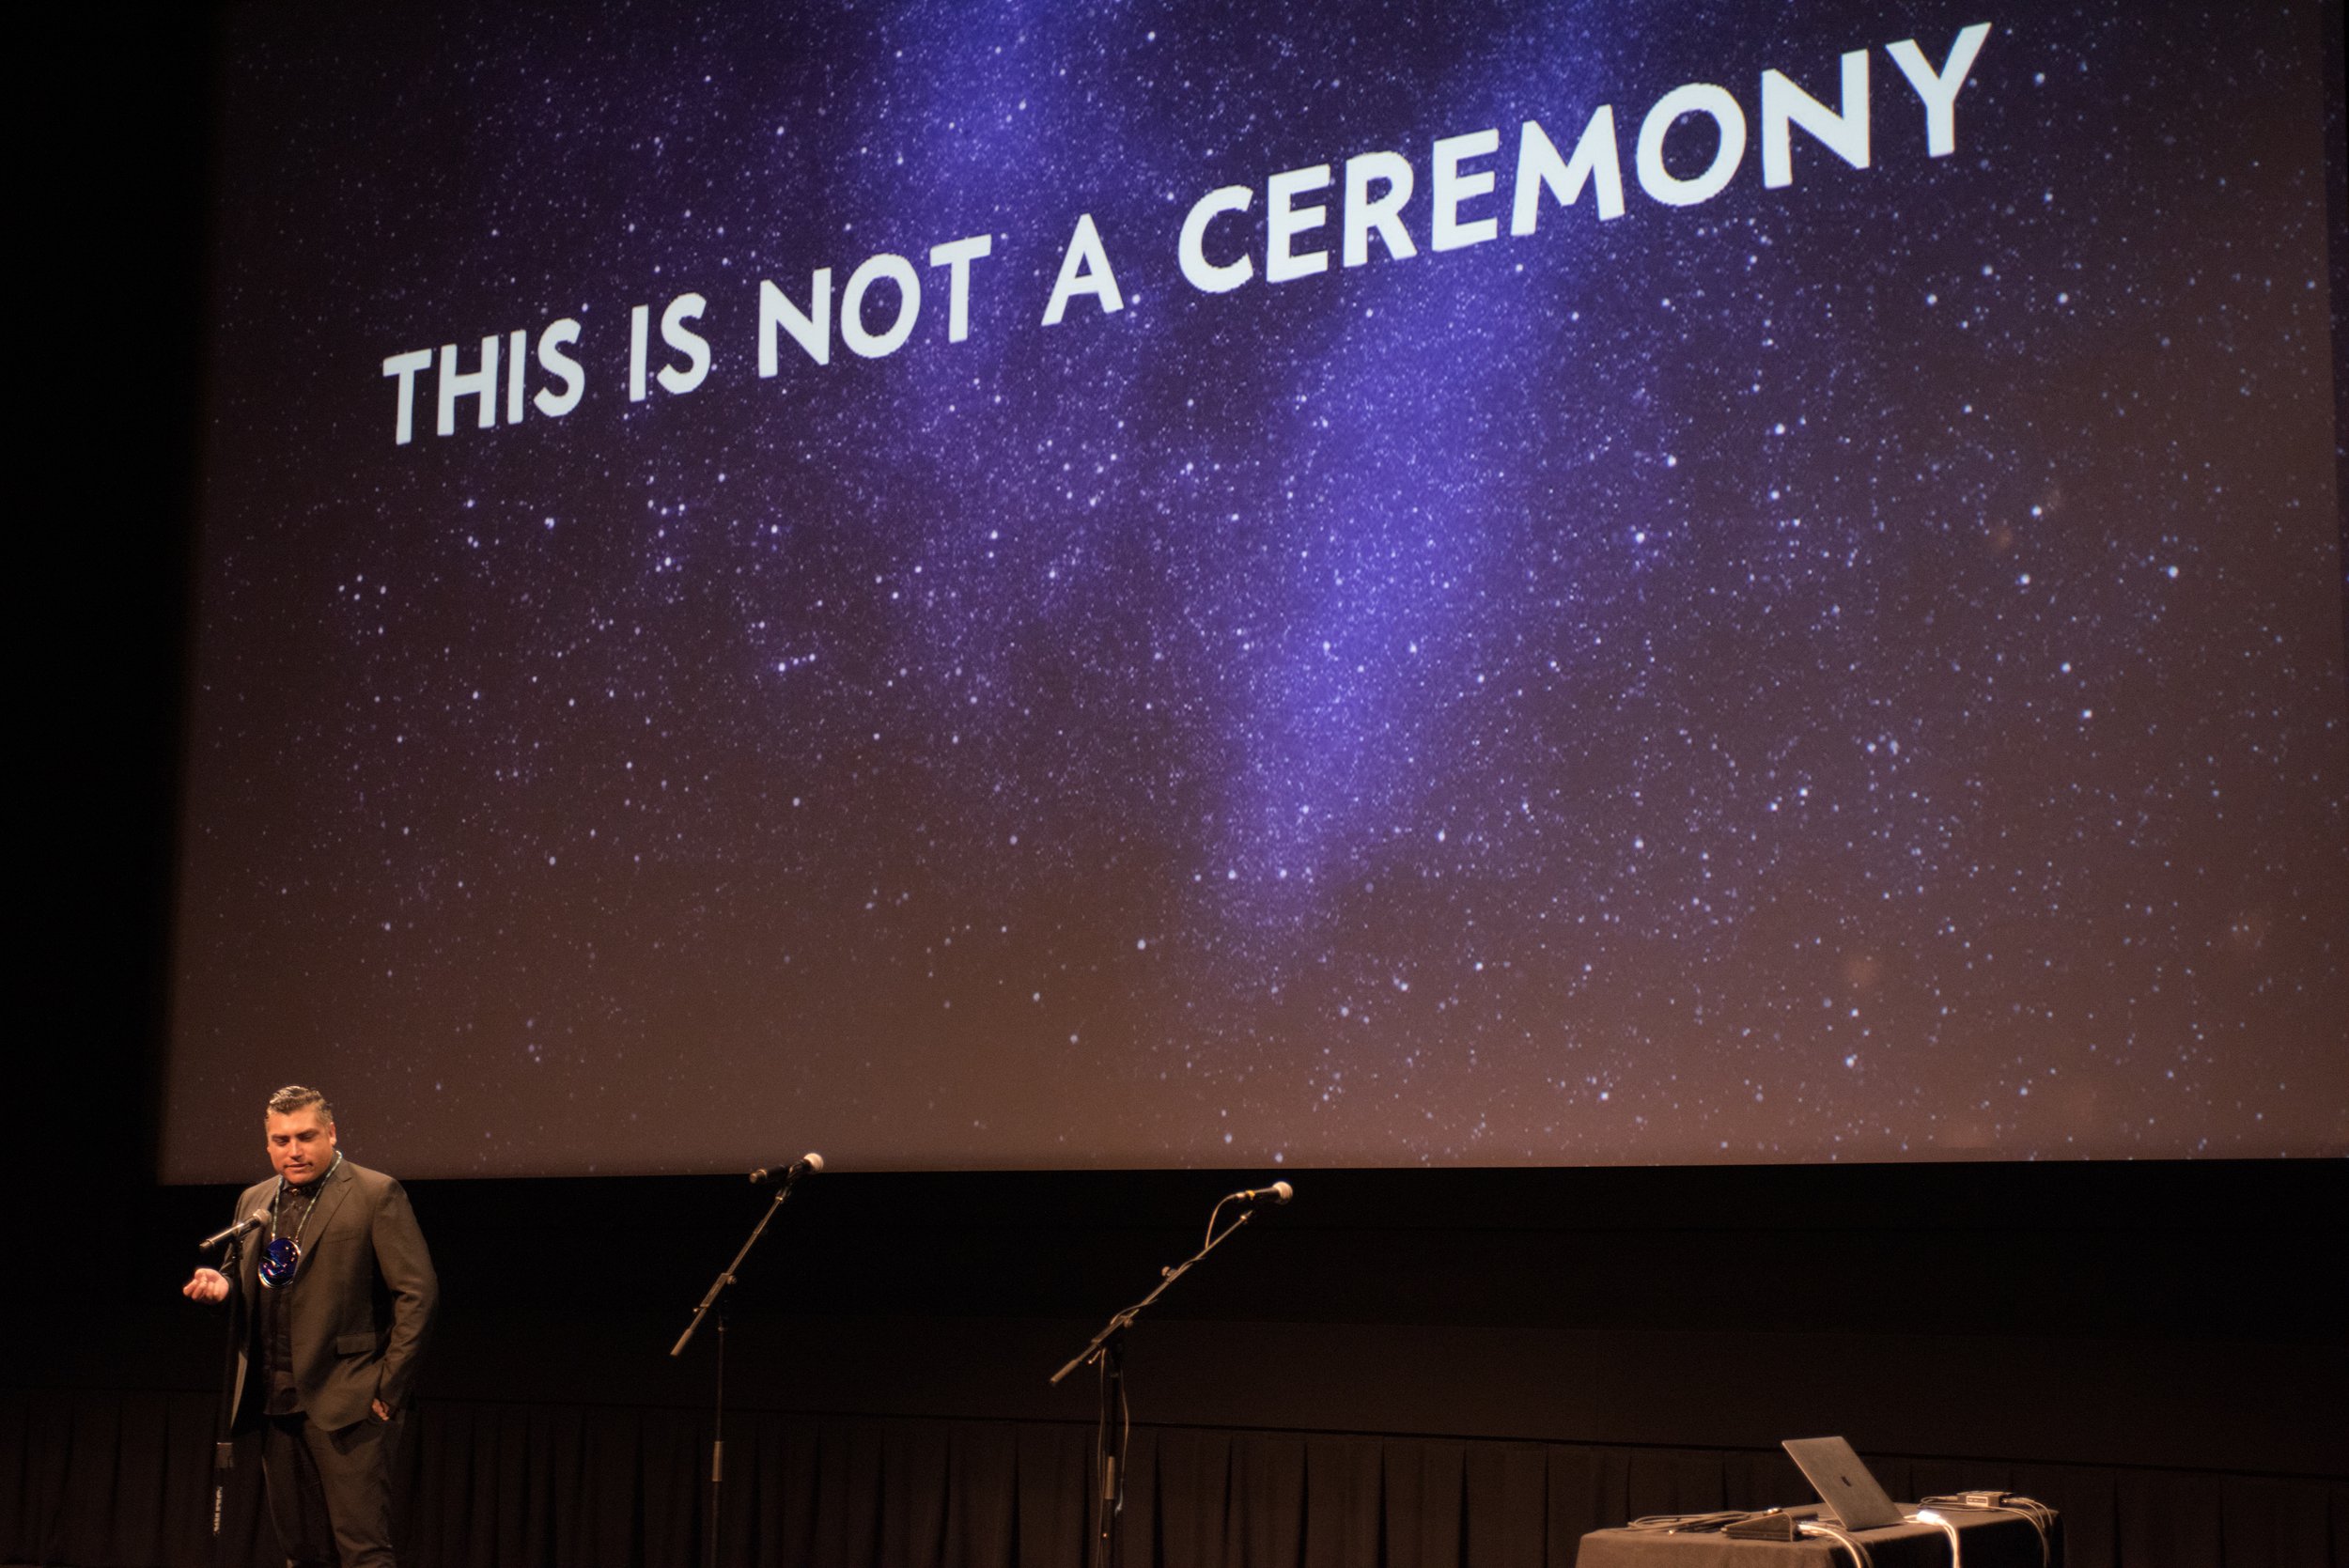 Colin Van Loon accepting the Digital + Interactive Award for his VR experience "This is Not a Ceremony." Image by Pengkuei Ben Huang.